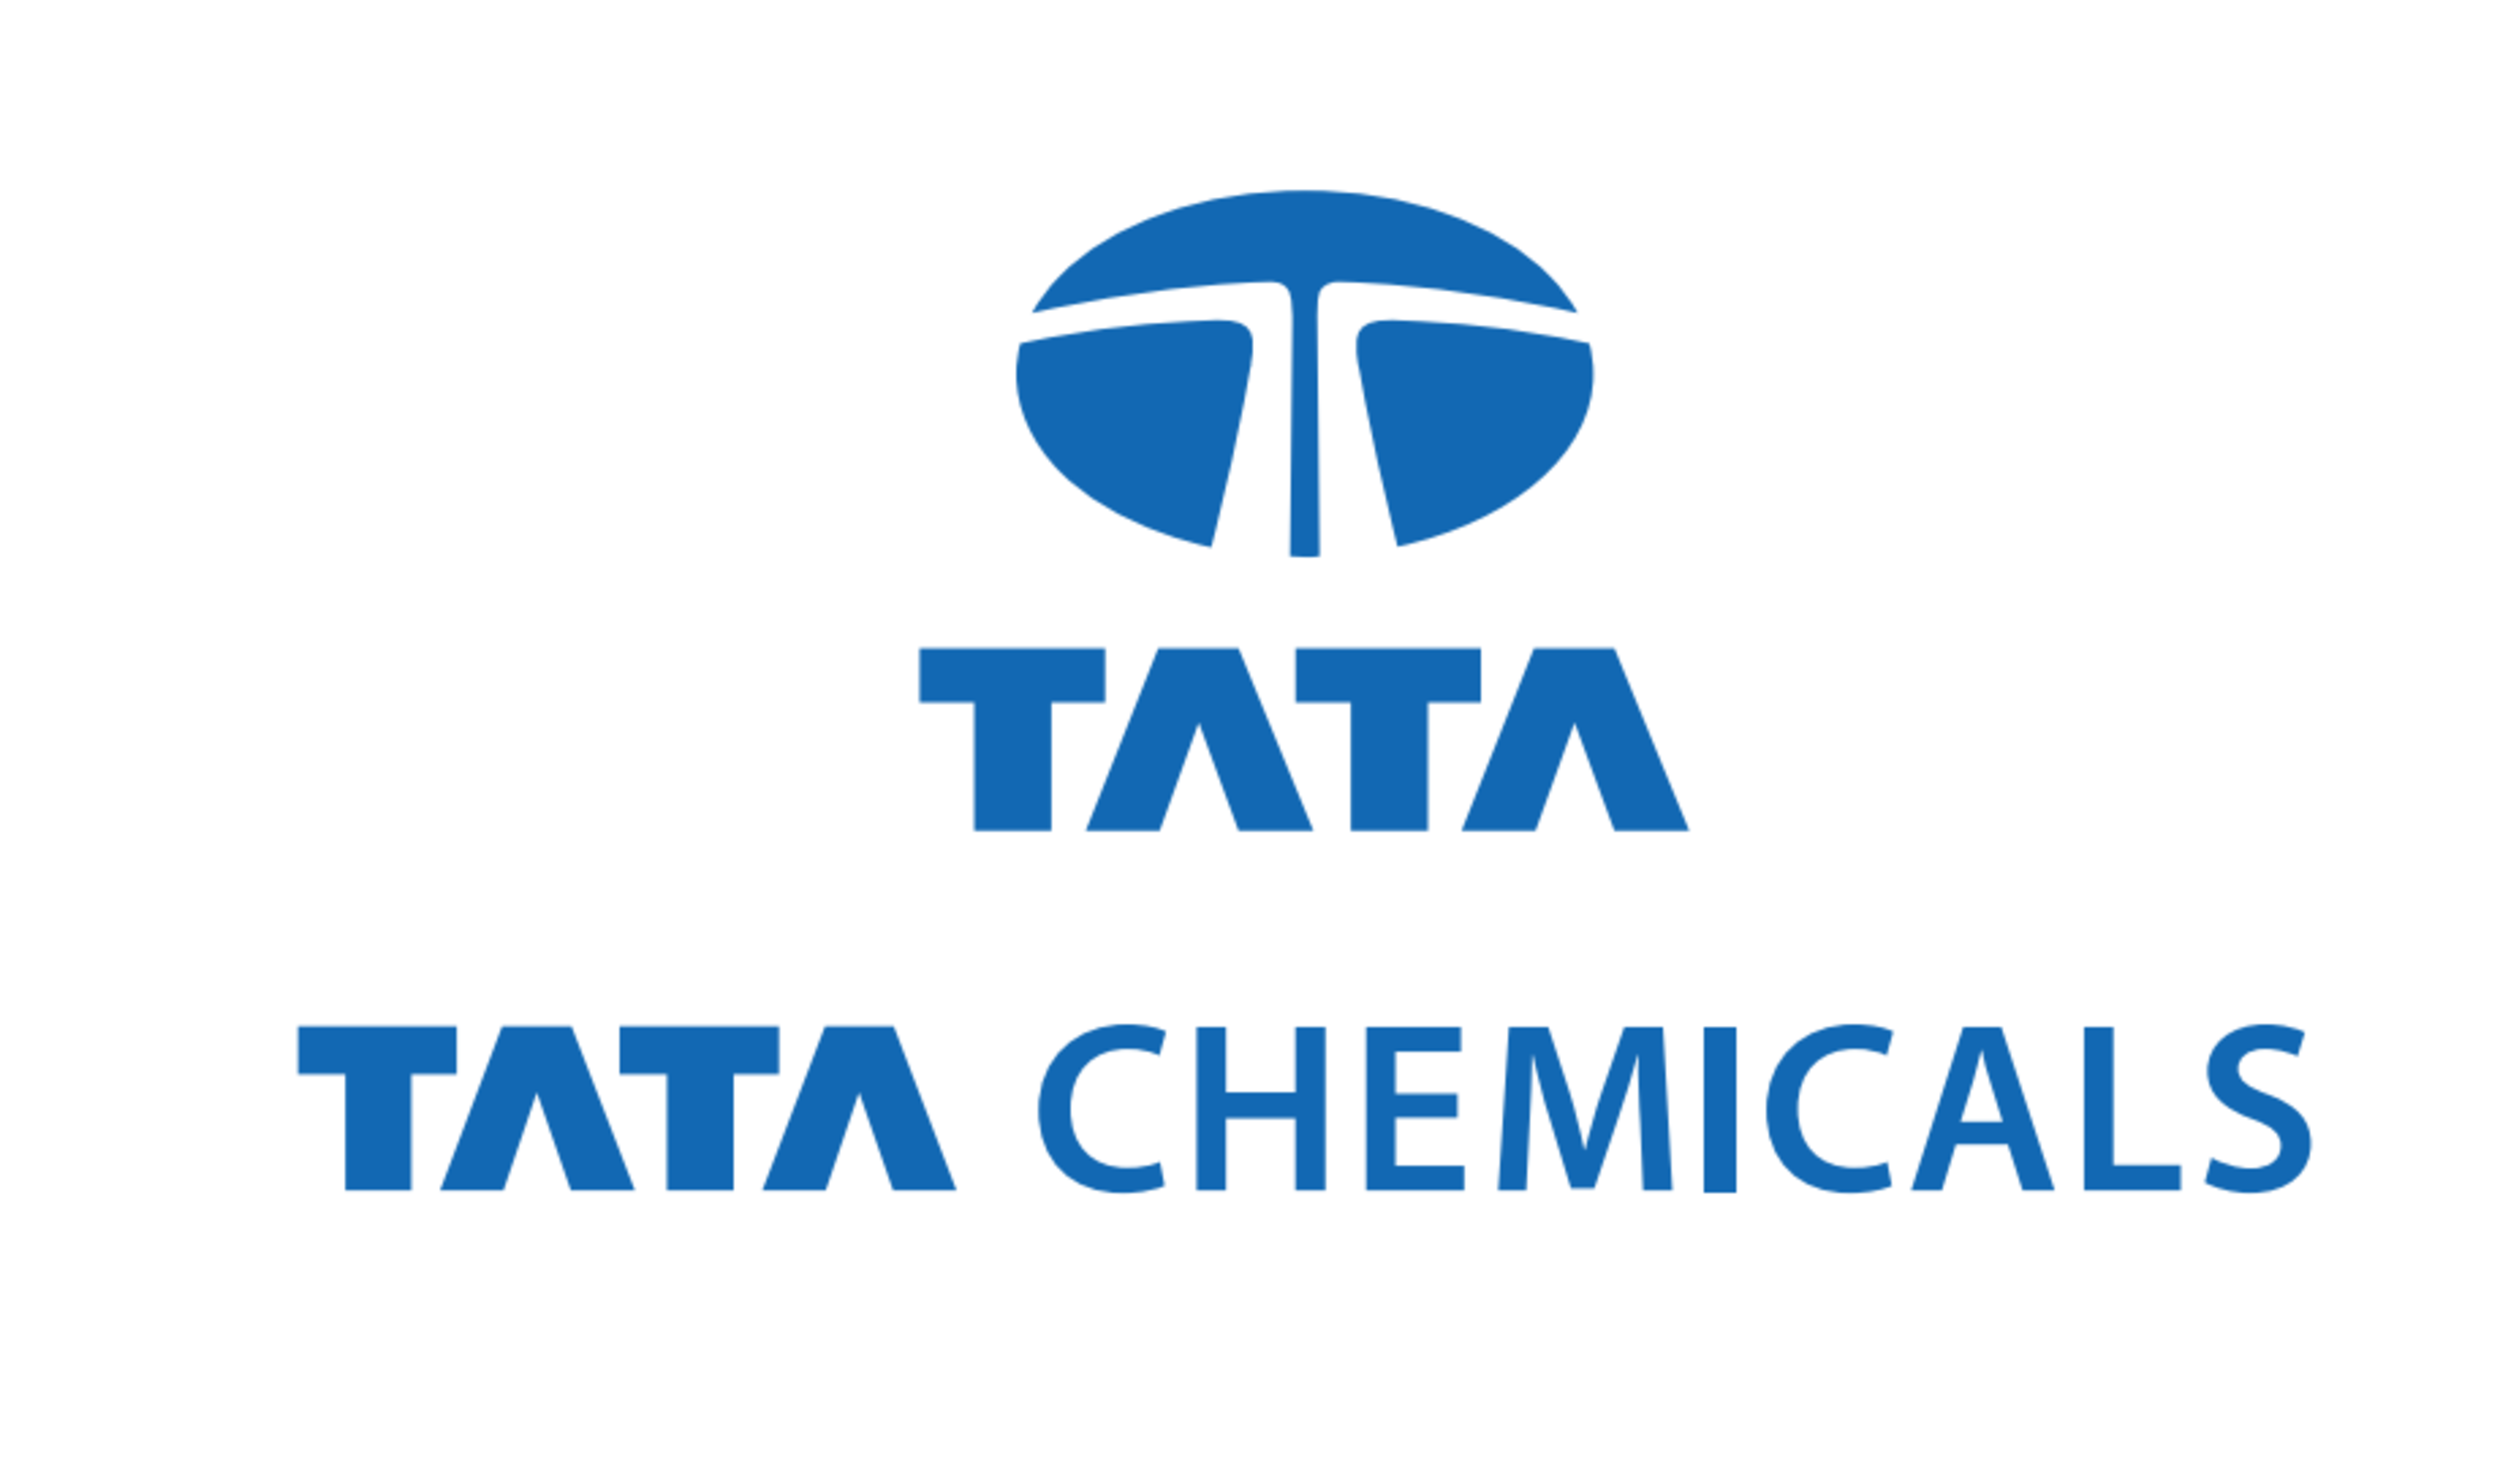 Tata Chemicals wins India’s top 25 Most Innovative Companies Award by CII for the third consecutive year